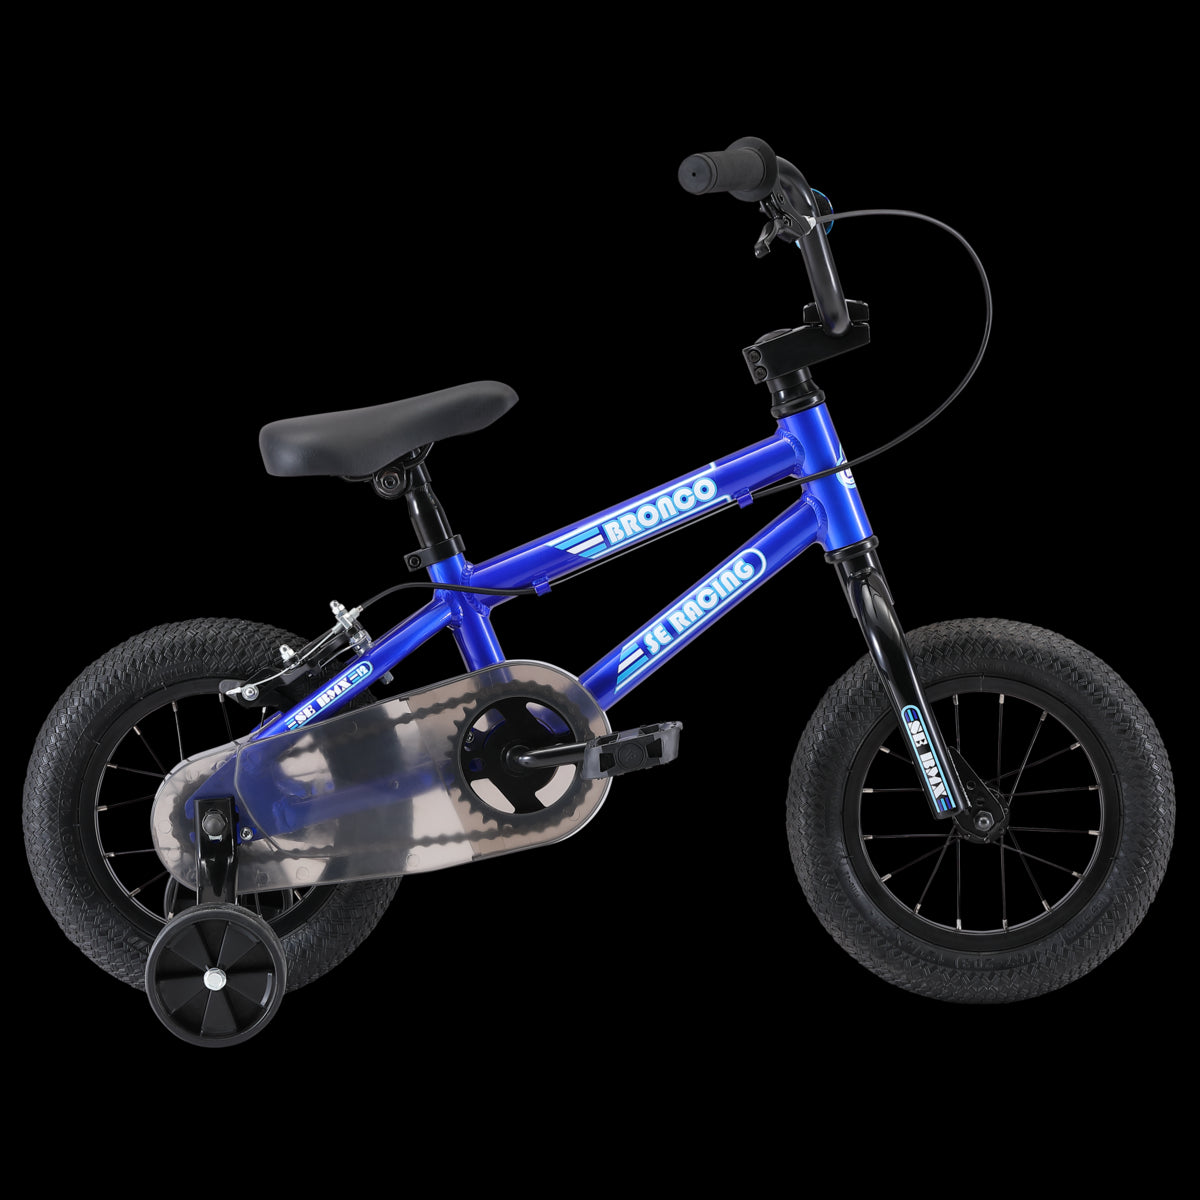 3. Can I build a BMX bike with used components?